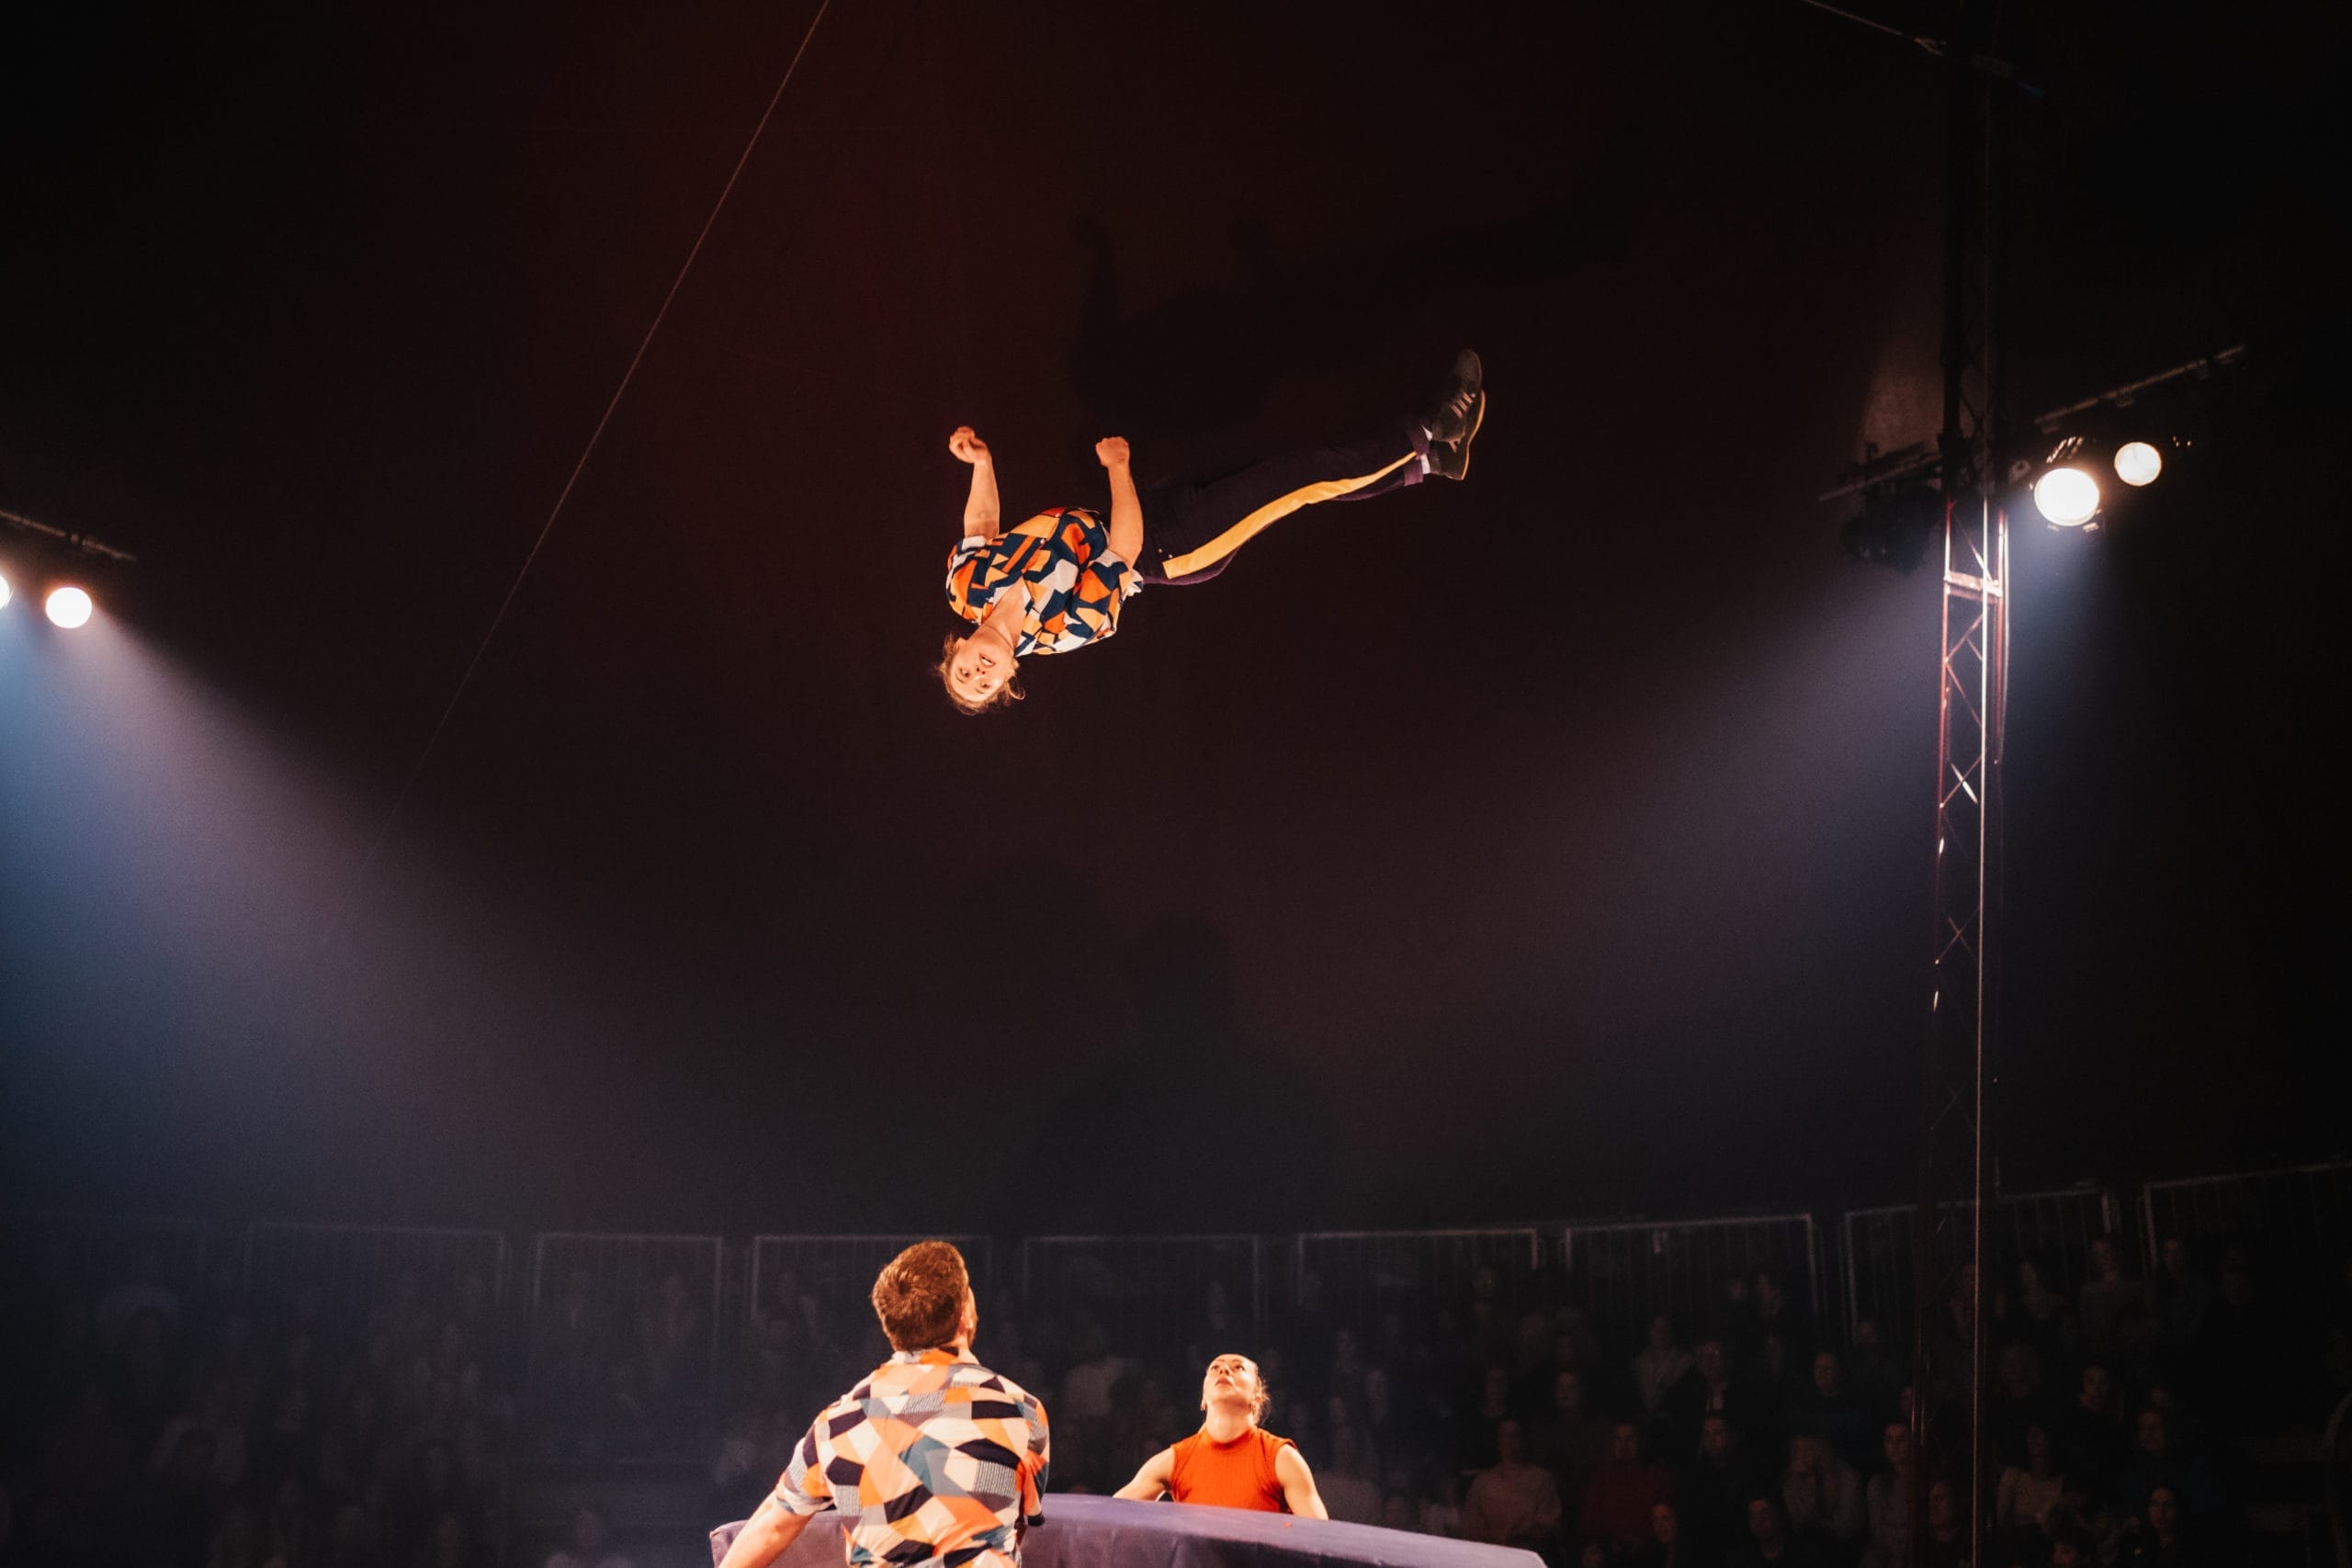 A Revel Puck circus performer is laying, parallel, in mid air. Two other performers have outstretched hands below, ready to catch their troupe-mate. Dynamic stage lights illuminate the scene.